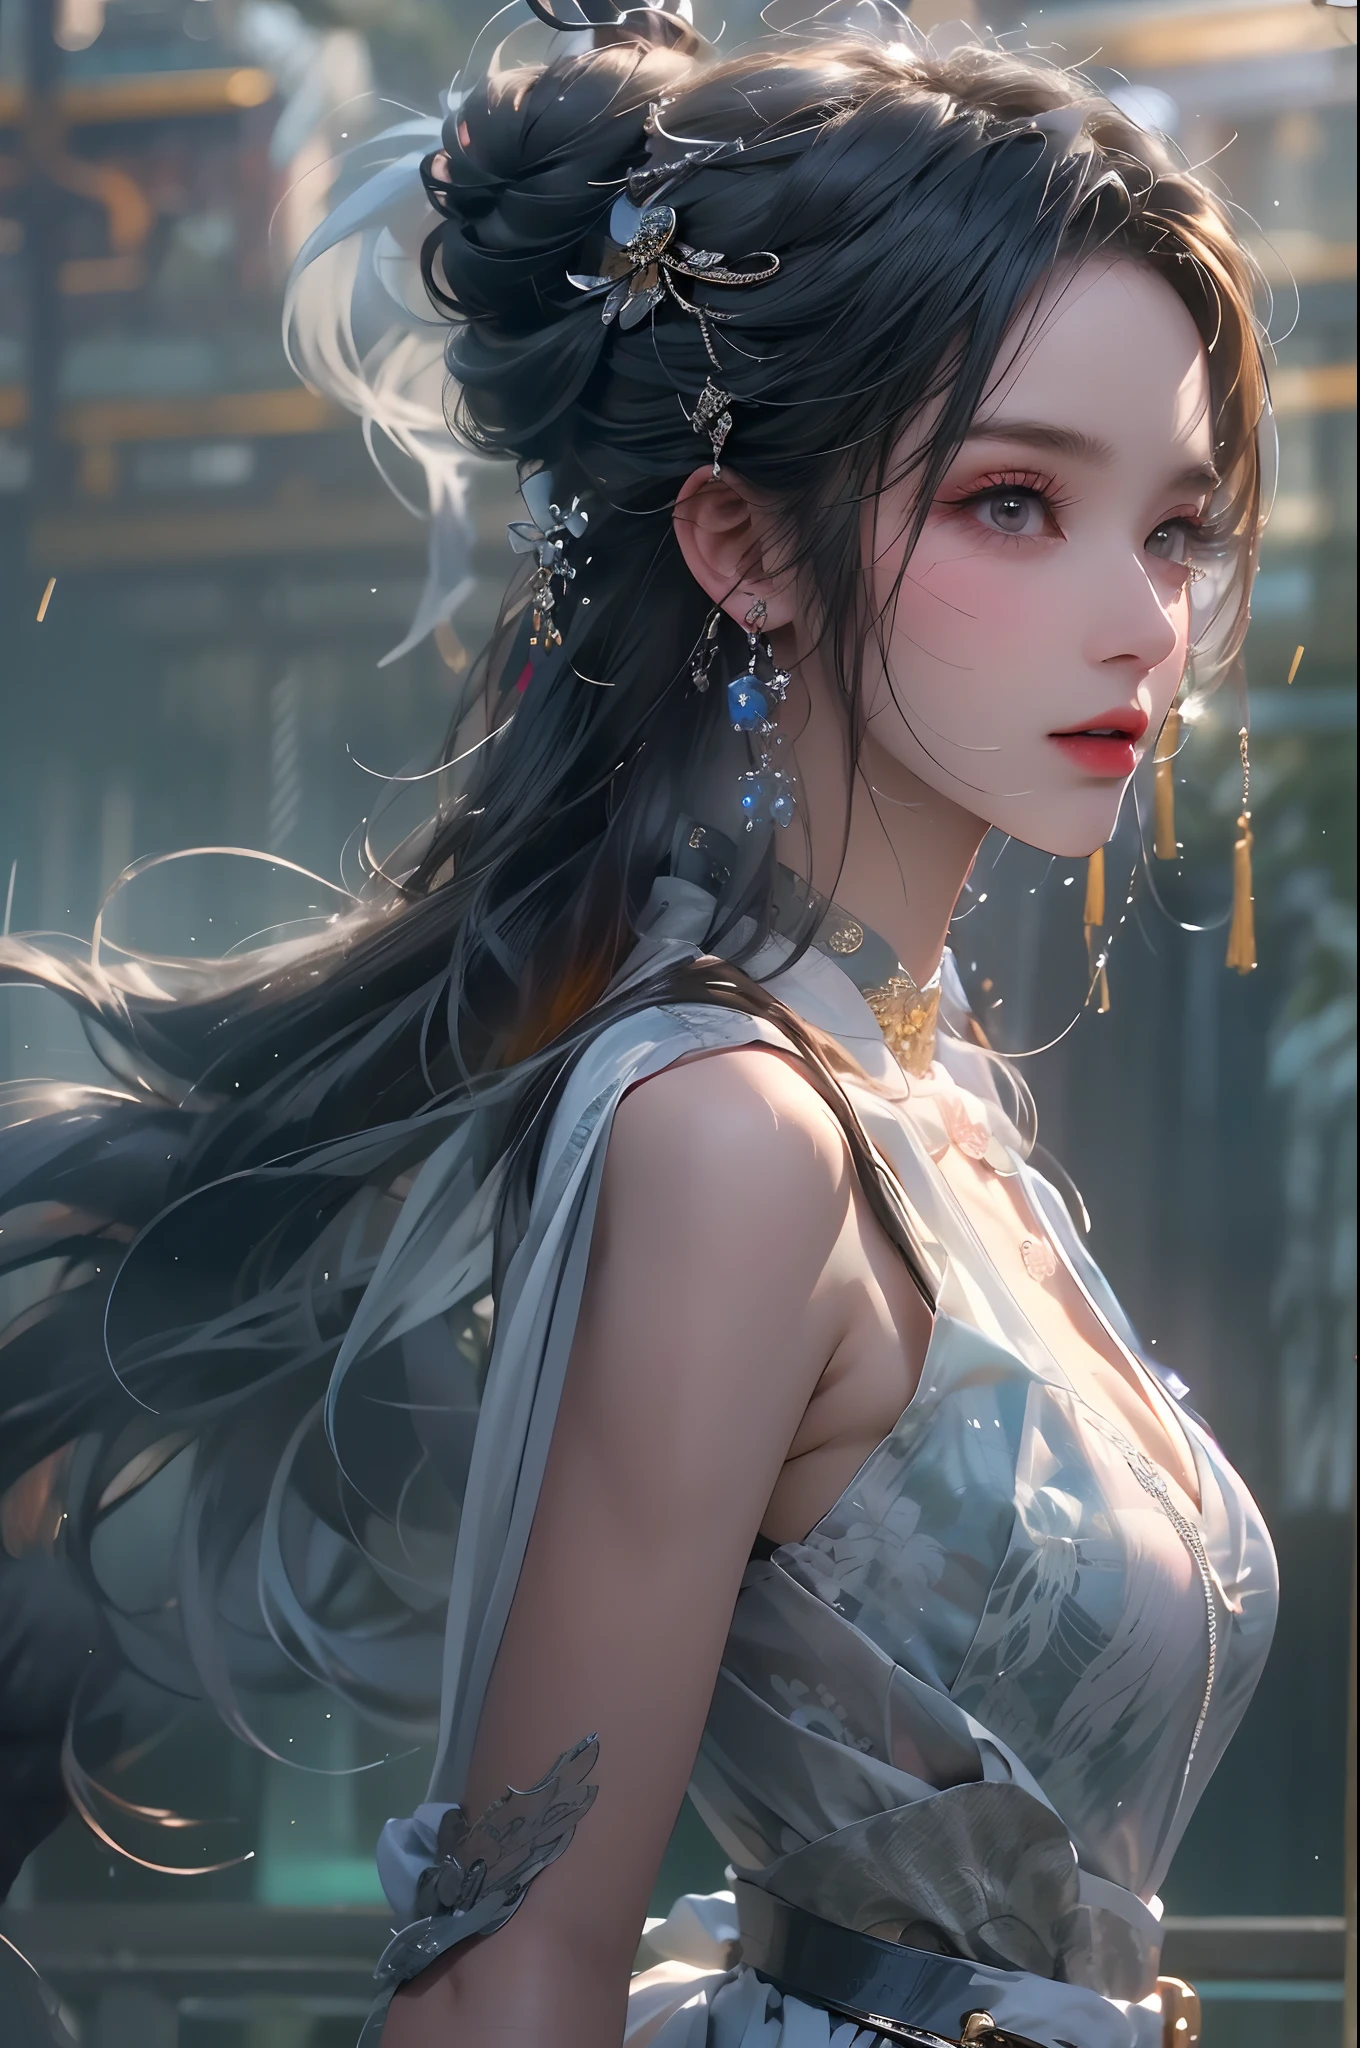 In a futuristic cityscape, Traditional Chinese elements are seamlessly integrated with advanced technology, A young woman stood confidently, Beautifully decorated jewelry. Her delicate facial features are highlighted by a bright smile, When she poses for the audience. Her long, Black hair flowed down her back, Outline her beautiful neck，Accentuate her soft curves.

She wears white, Chinese-style cheongsam, Its intricate pattern shimmers with purple moire. The low-cut neckline of the dress reveals a hint, Add an alluring touch to her otherwise serene exterior. A short, A black pleated skirt fluttered over her legs, Pair it with black lens stockings，Add a touch of sophistication.

On her ears, She wears a pair of delicate earrings, around her neck, A stunning necklace. Her purple double ponytail is adorned with purple-eared steamed buns, Add a touch of playfulness to her otherwise elegant exterior. In her hand, she is holding a sword, Be prepared to protect yourself or those around you.

When lightning streaks across the sky, The scene is bathed in an otherworldly glow. The thunderclap broke the silence, Echo through the towering skyscrapers of the city. Despite the chaos outside, The young woman remained calm, Her calm expression remained unchanged.

The entire scene was shot in perfect light, The attention to detail，Truly breathtaking. All aspects of the image, From intricate patterns on women's dresses to sparkling skylines in the background, Presented in extreme detail. This stunning image is a masterpiece, The perfect blend of technology and tradition, Be ready to be admired for years to come.